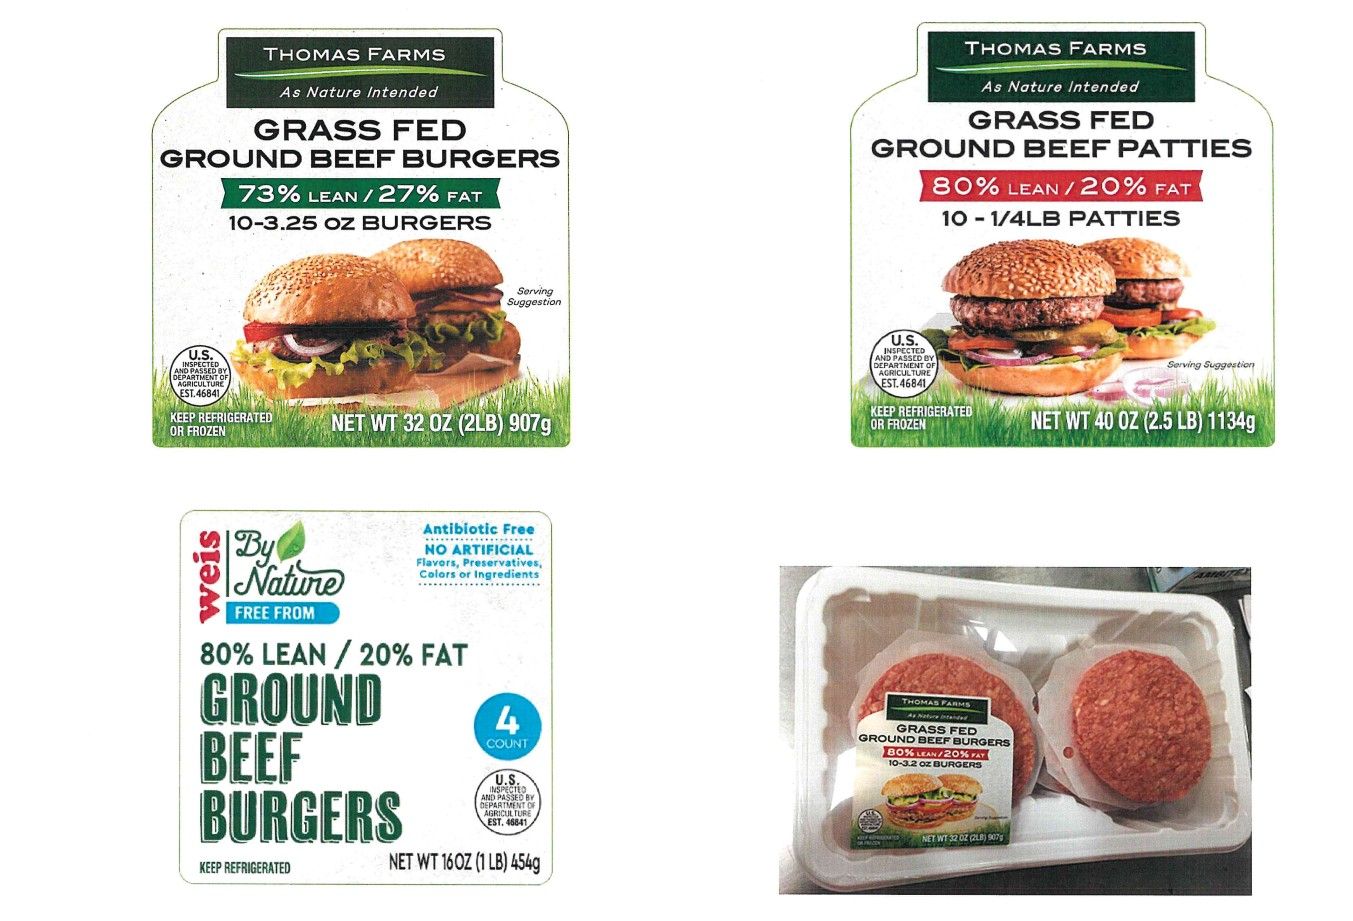 More Than 120K Pounds of Ground Beef Recalled Due To Possible E. Coli